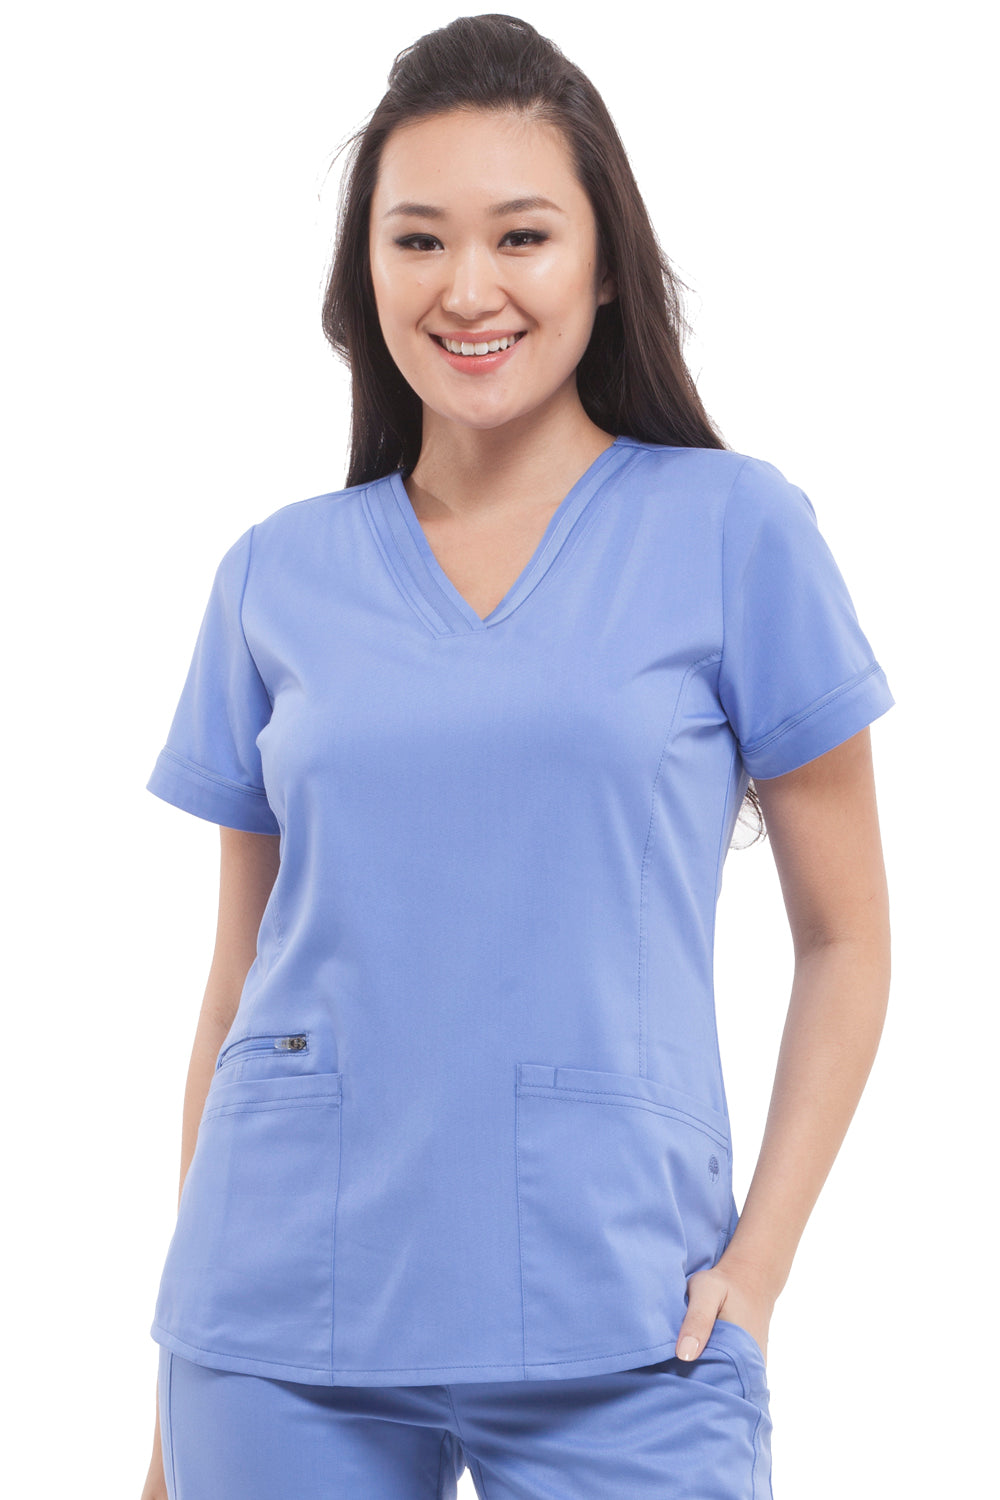 Healing Hands Scrub Top Purple Label Jasmin in Ceil at Parker's Clothing and Shoes.